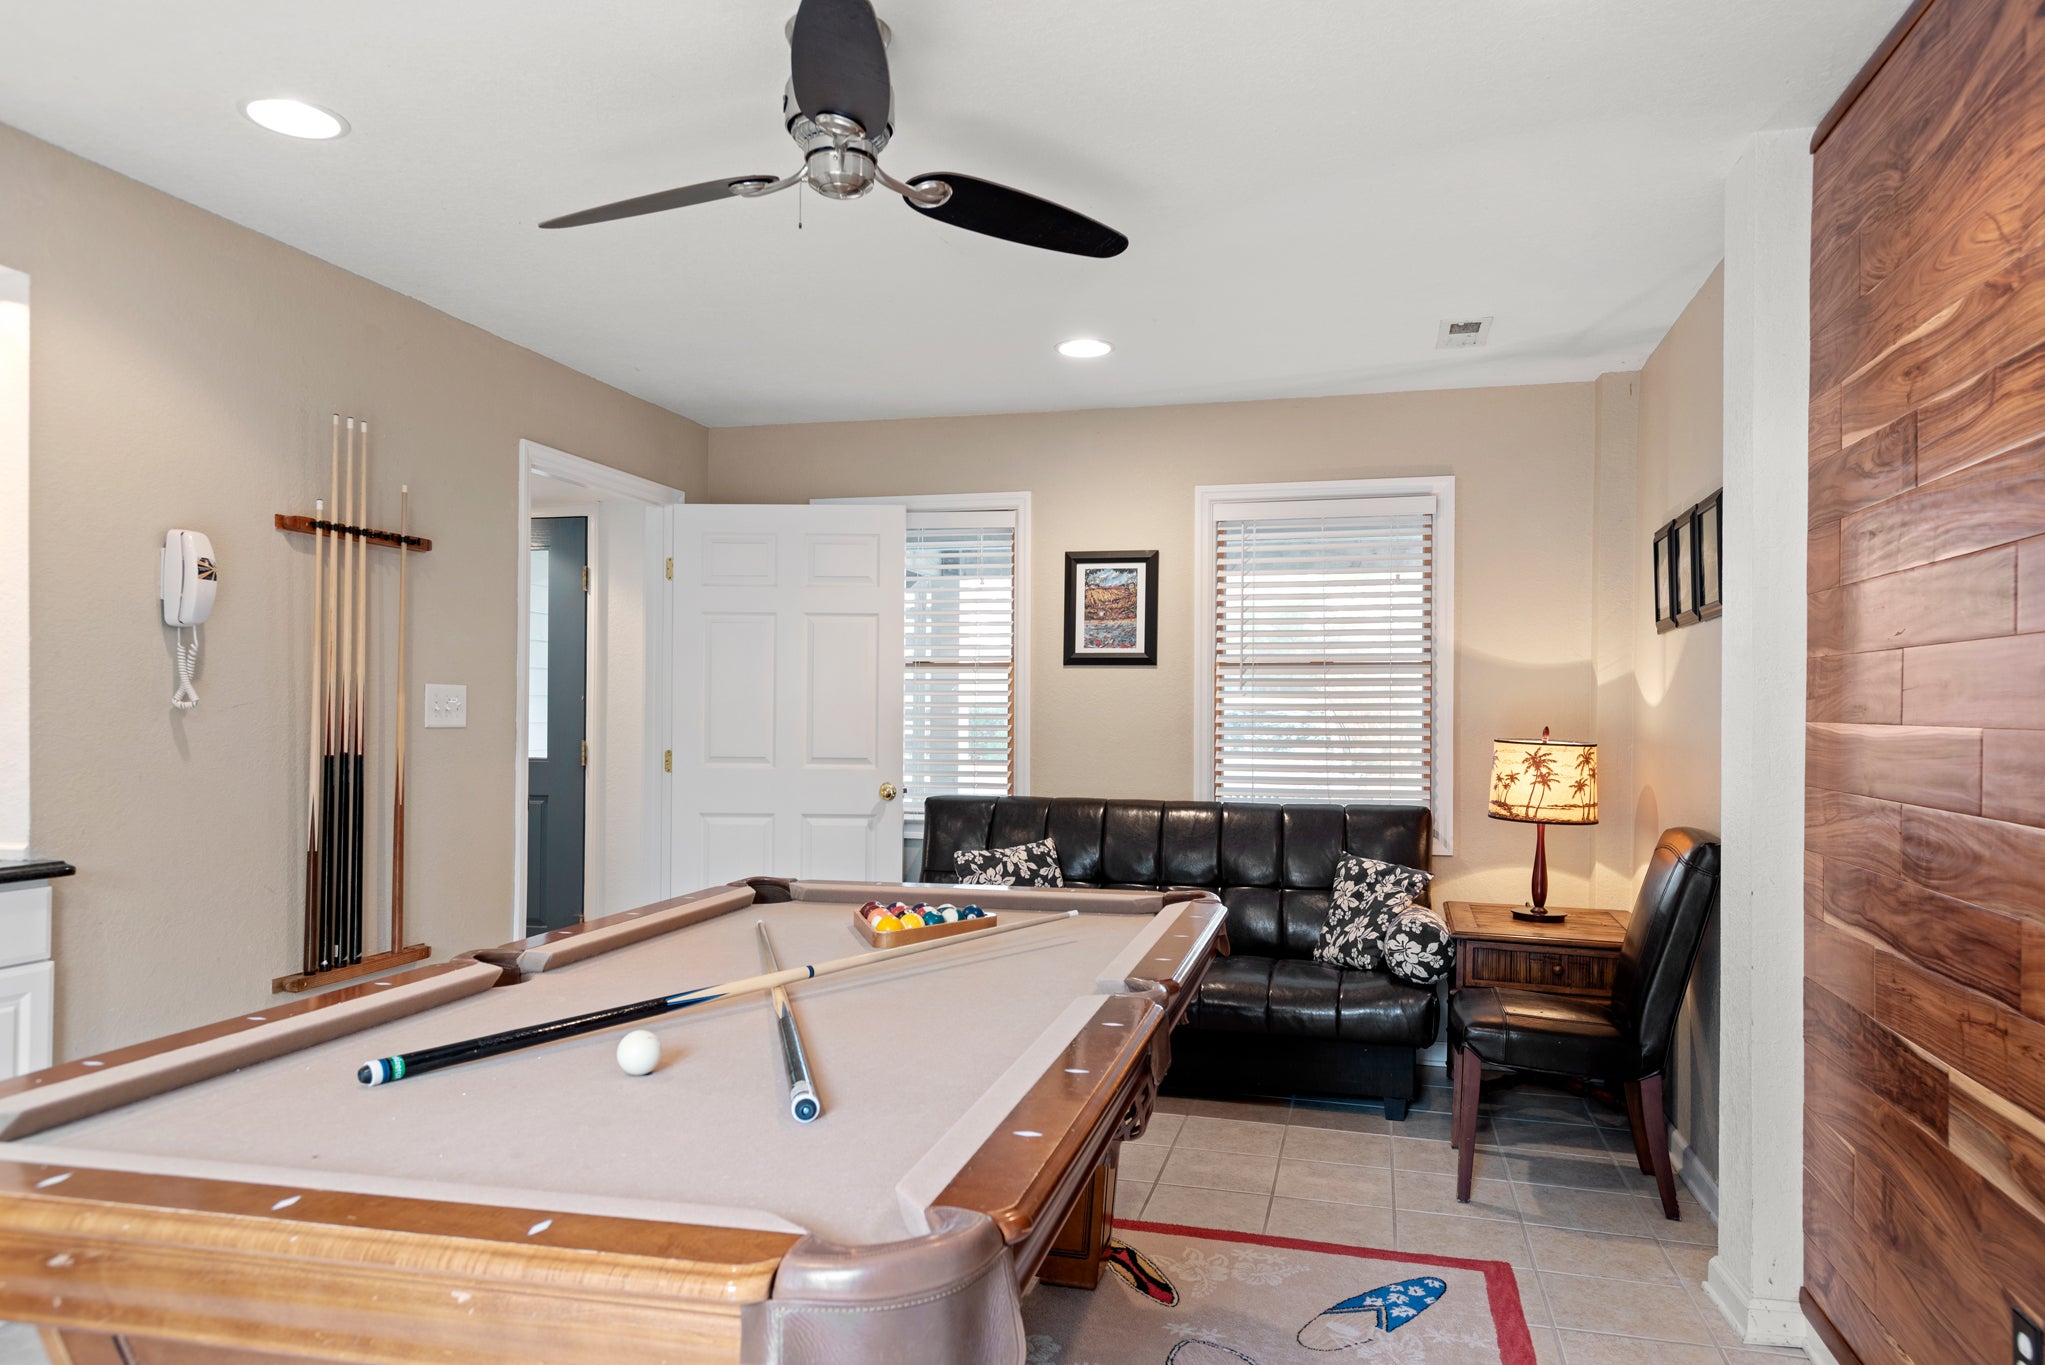 CL572: Endless Sunsets in Corolla Light l Bottom Level Rec Room